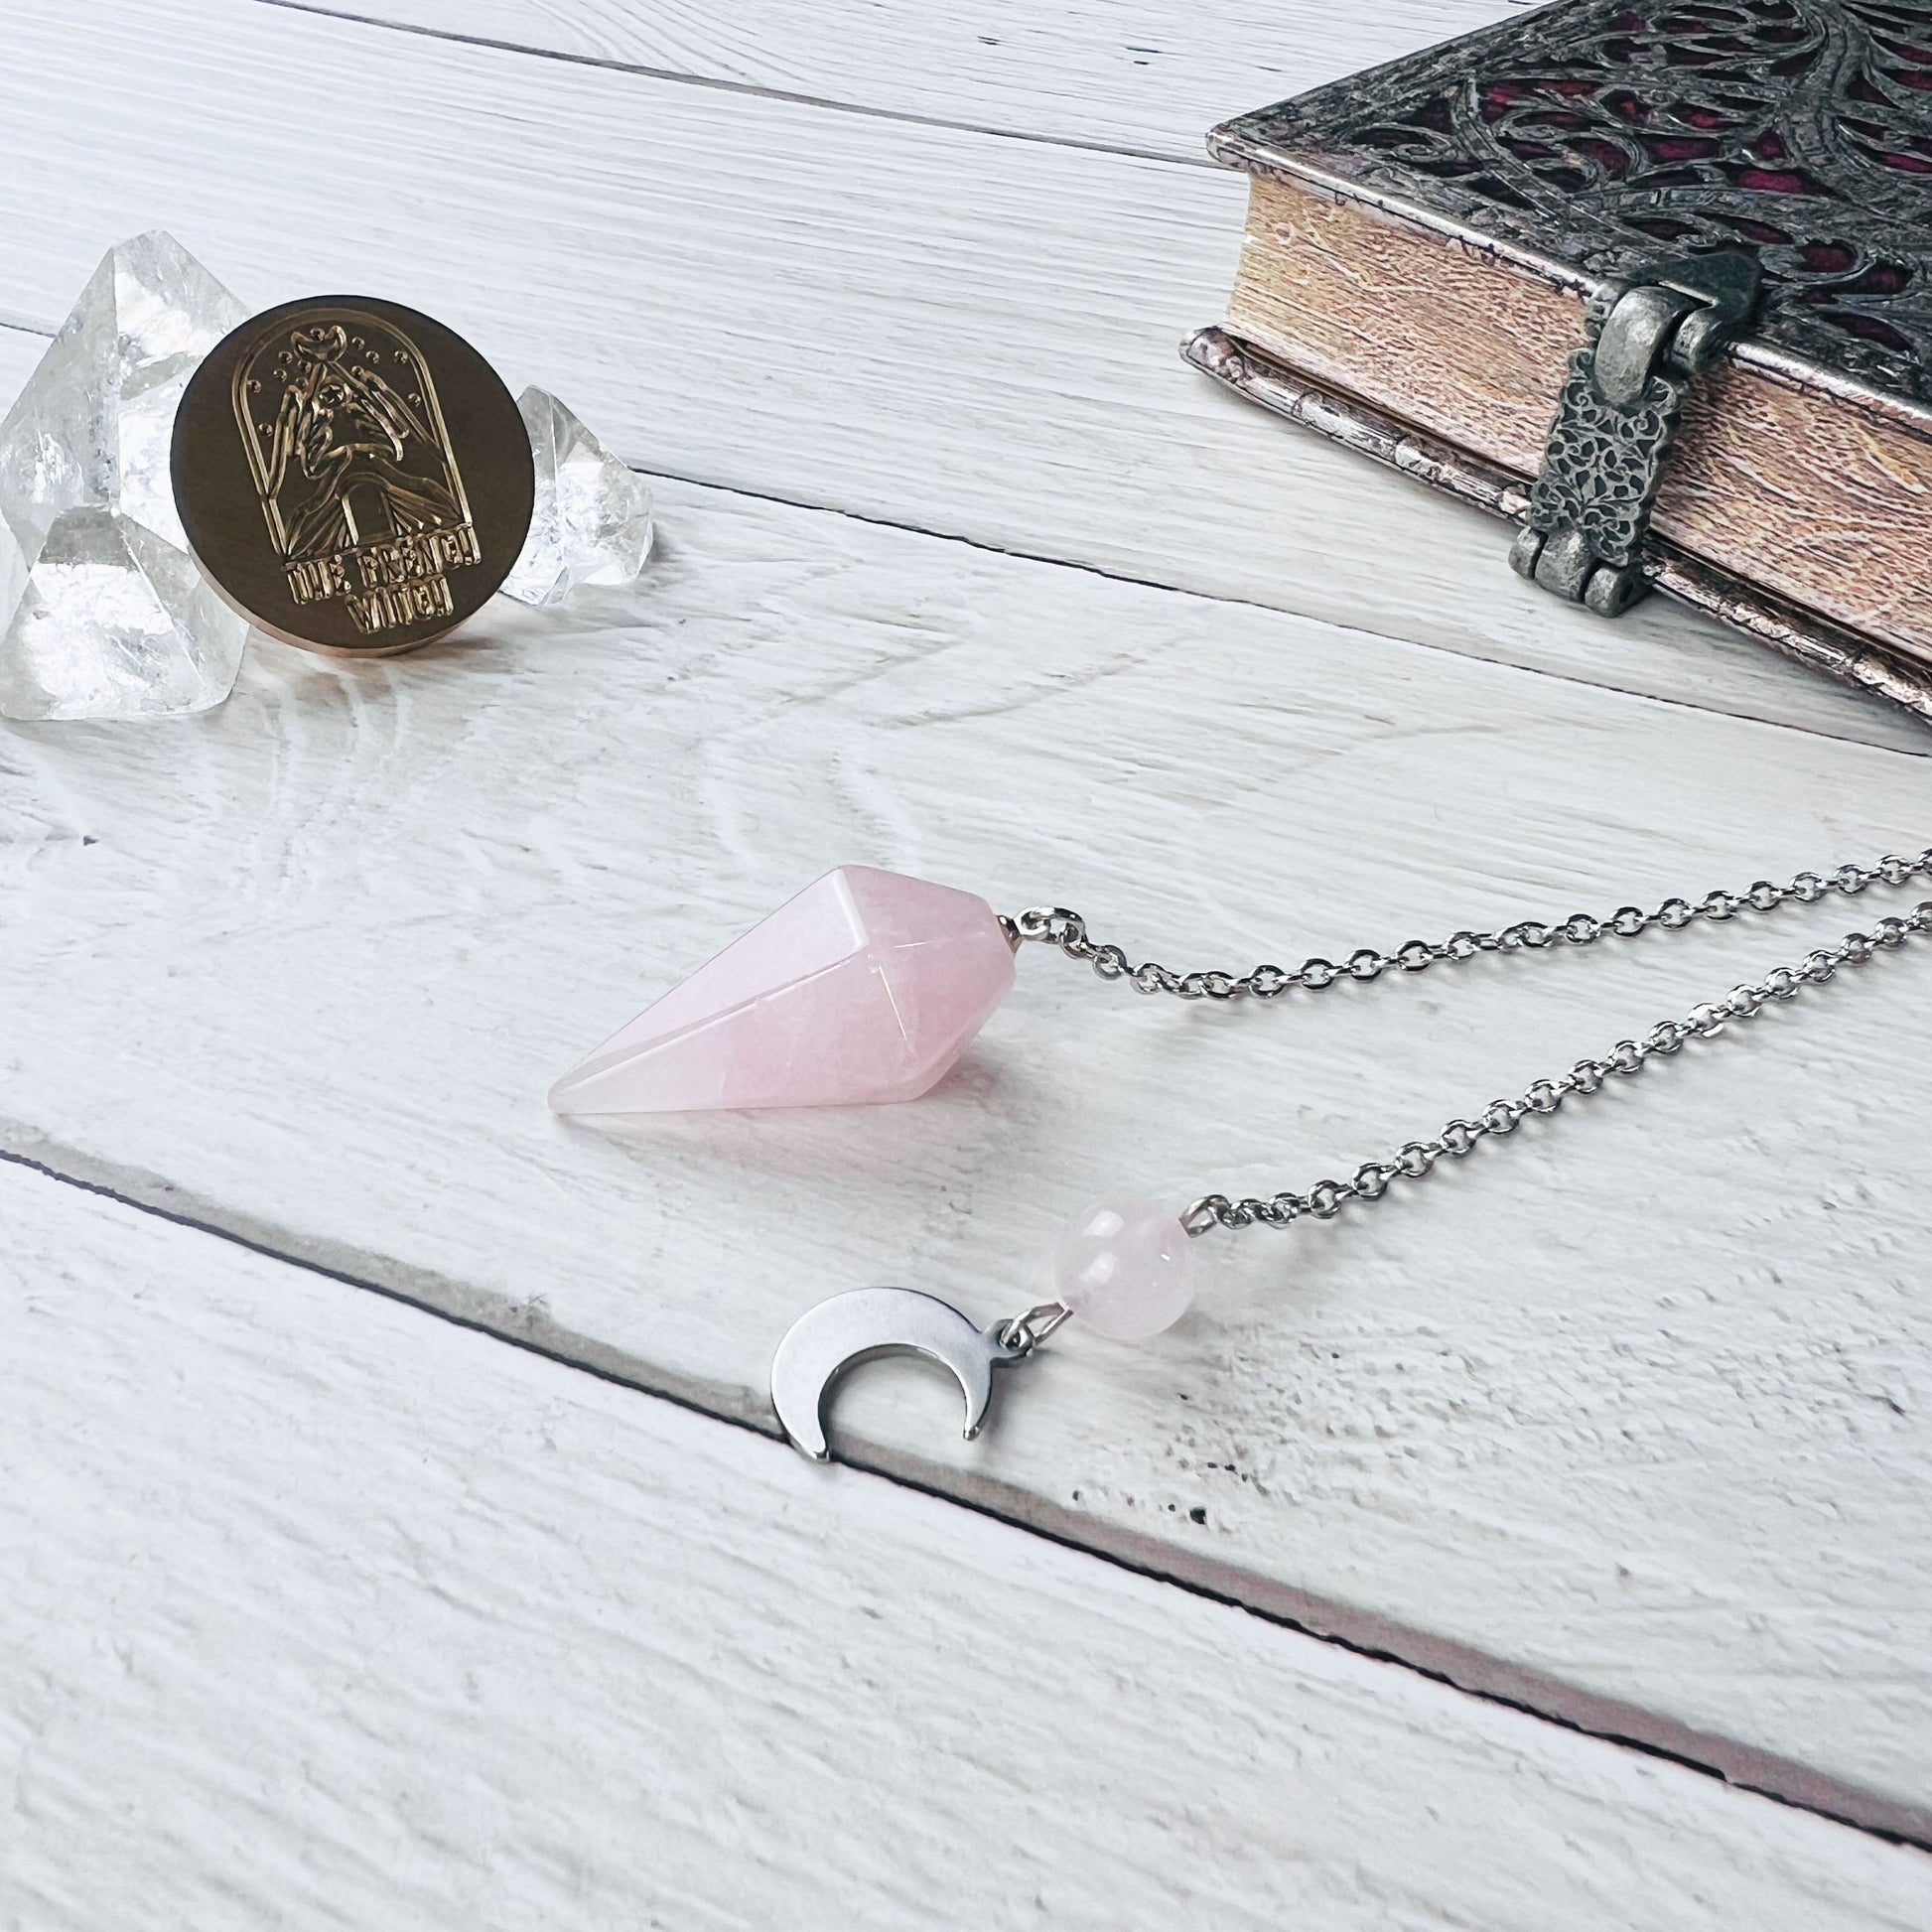 Rose quartz gemstone dowsing pendulum crescent moon and stainless steel witch divination tool